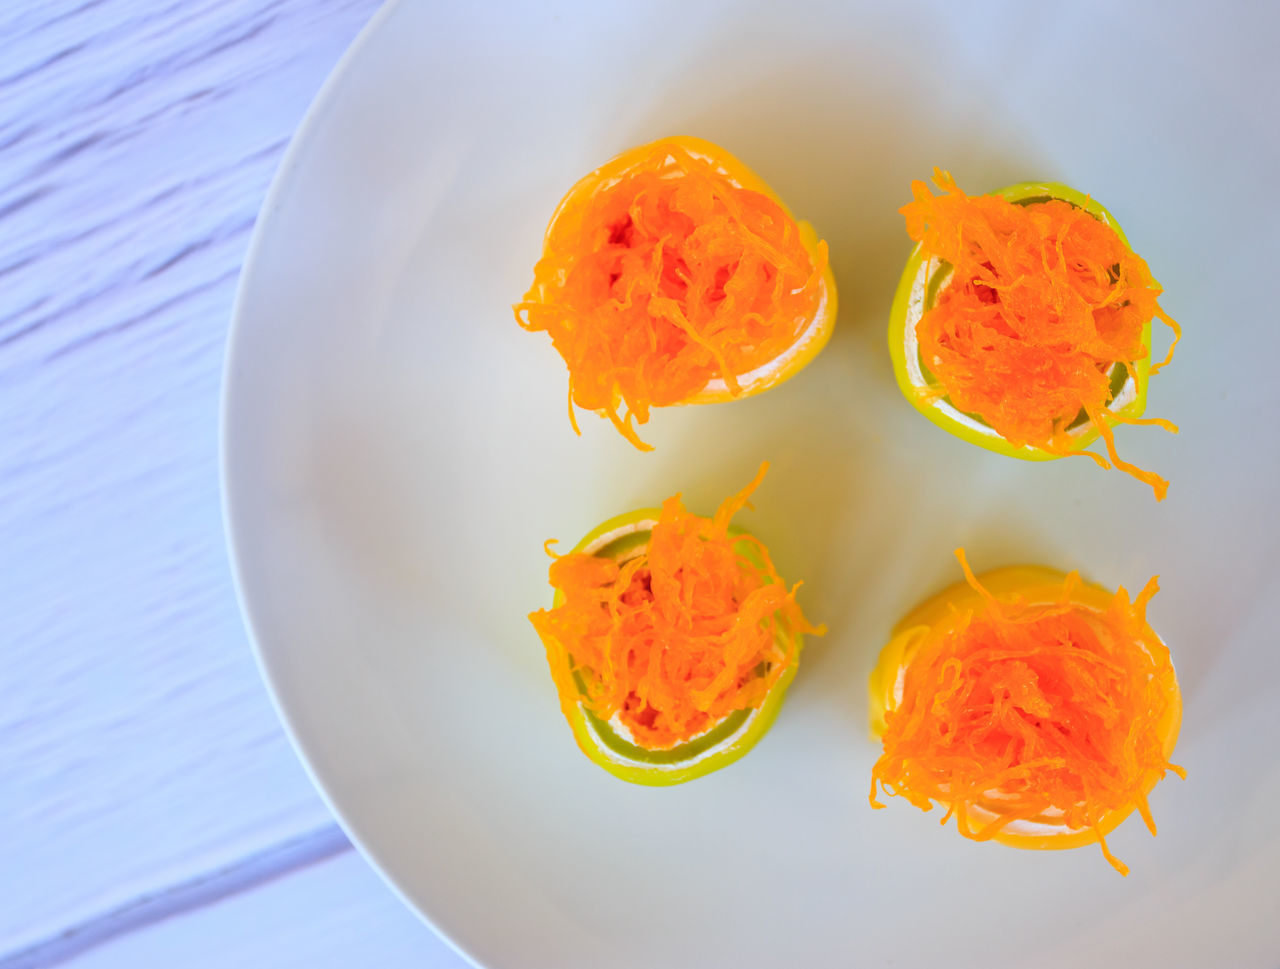 HIGH ANGLE VIEW OF ORANGE SLICES ON PLATE